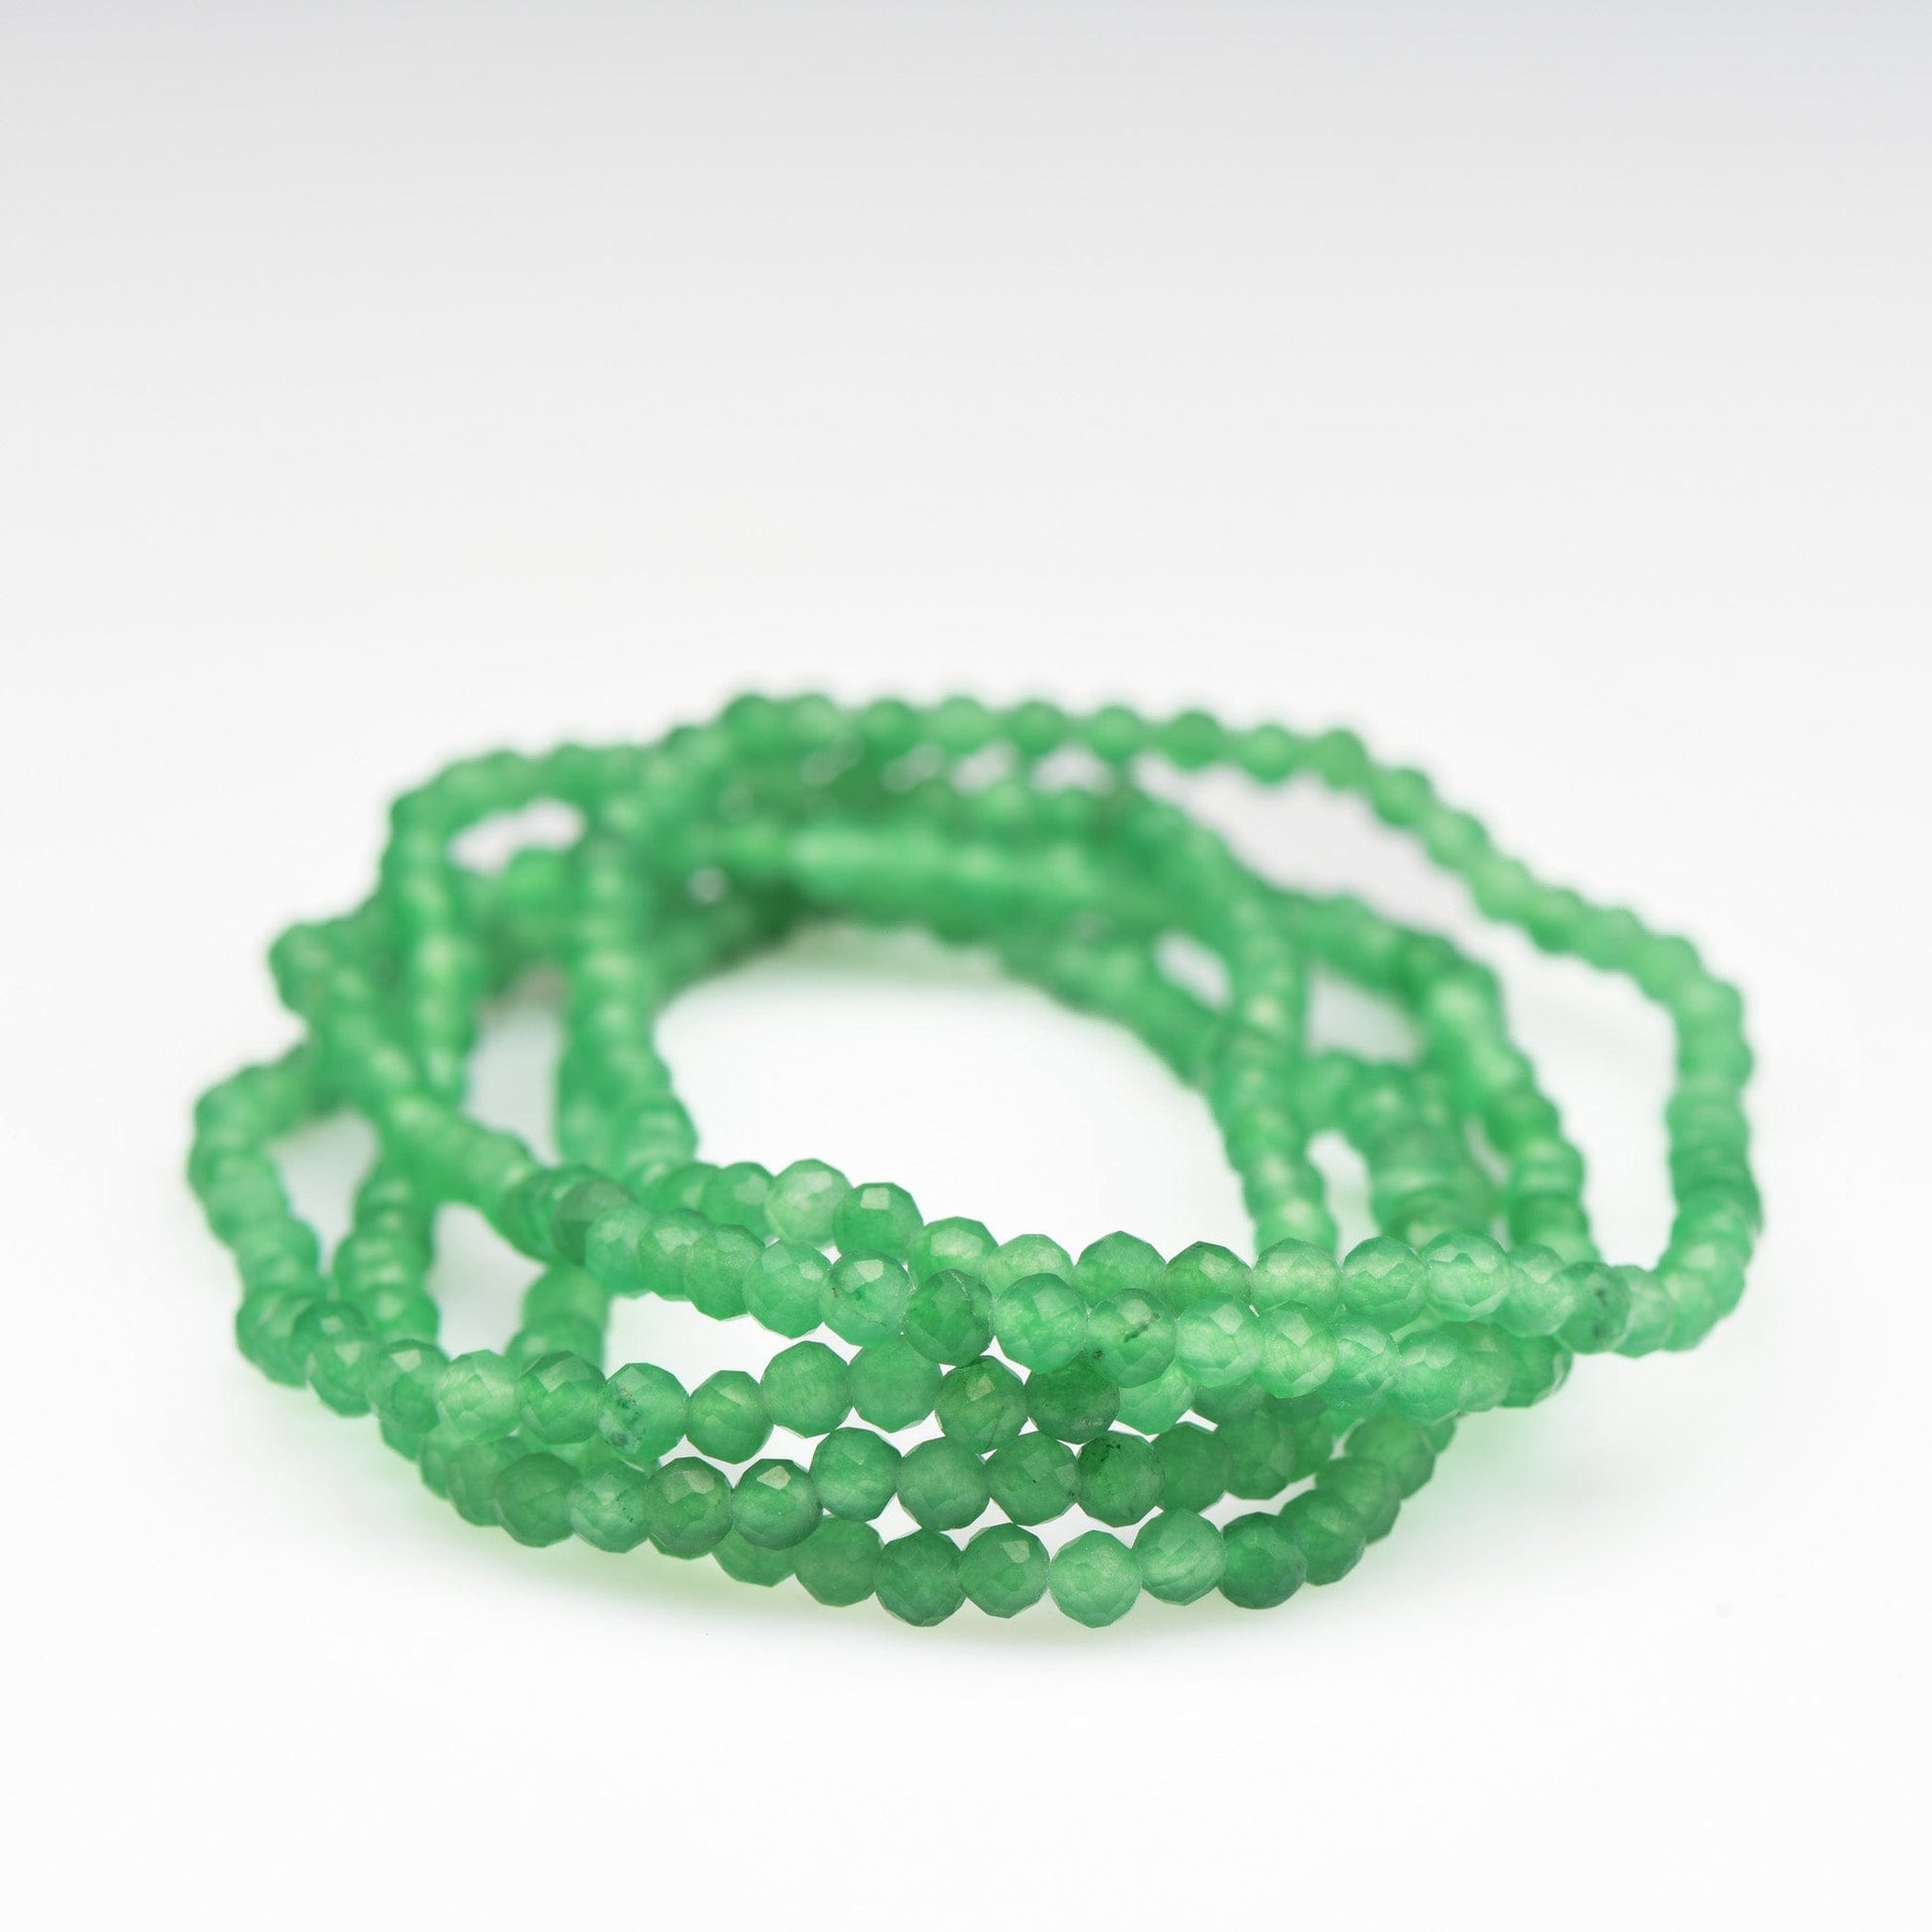 healing crystal jewelry: green aventurine crystal bracelet - Faceted Small Beads